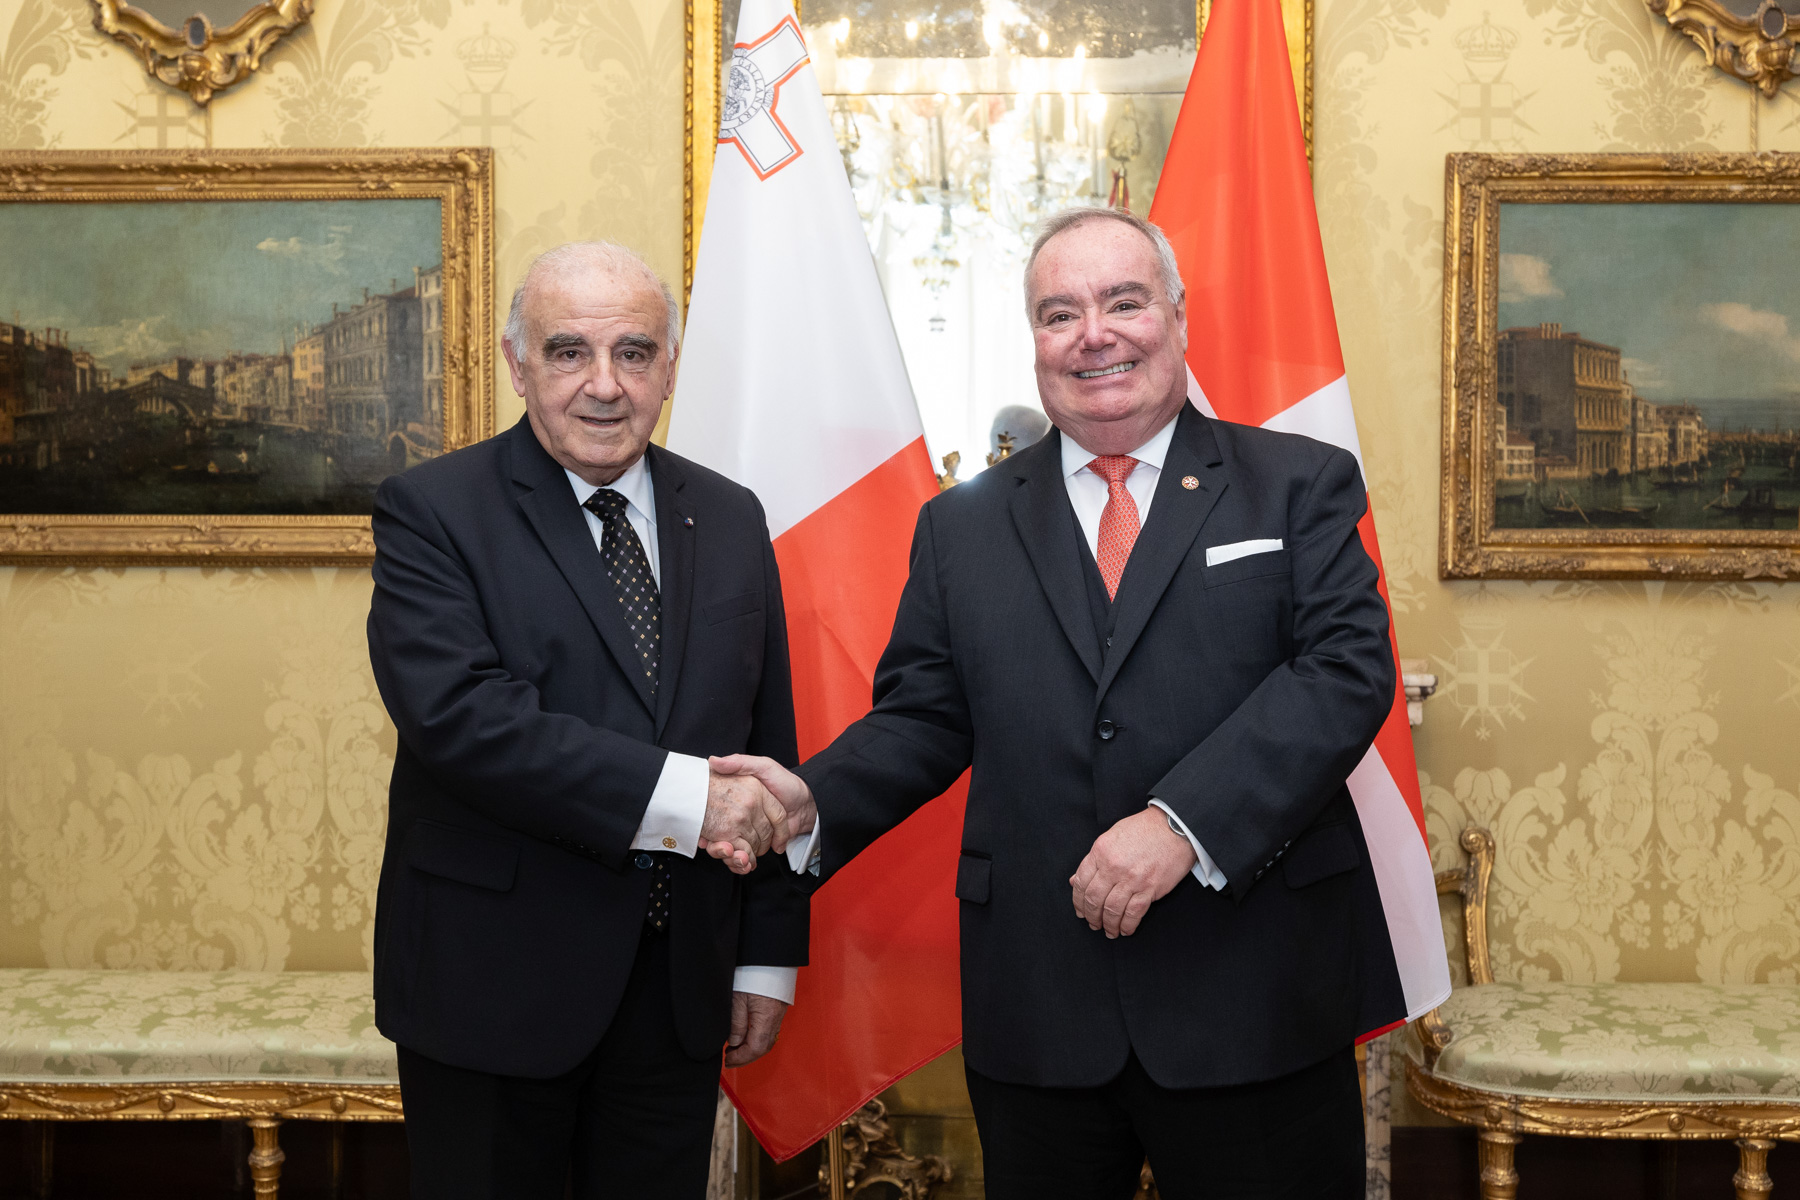 The President of the Republic of Malta on an official visit to the Grand Master